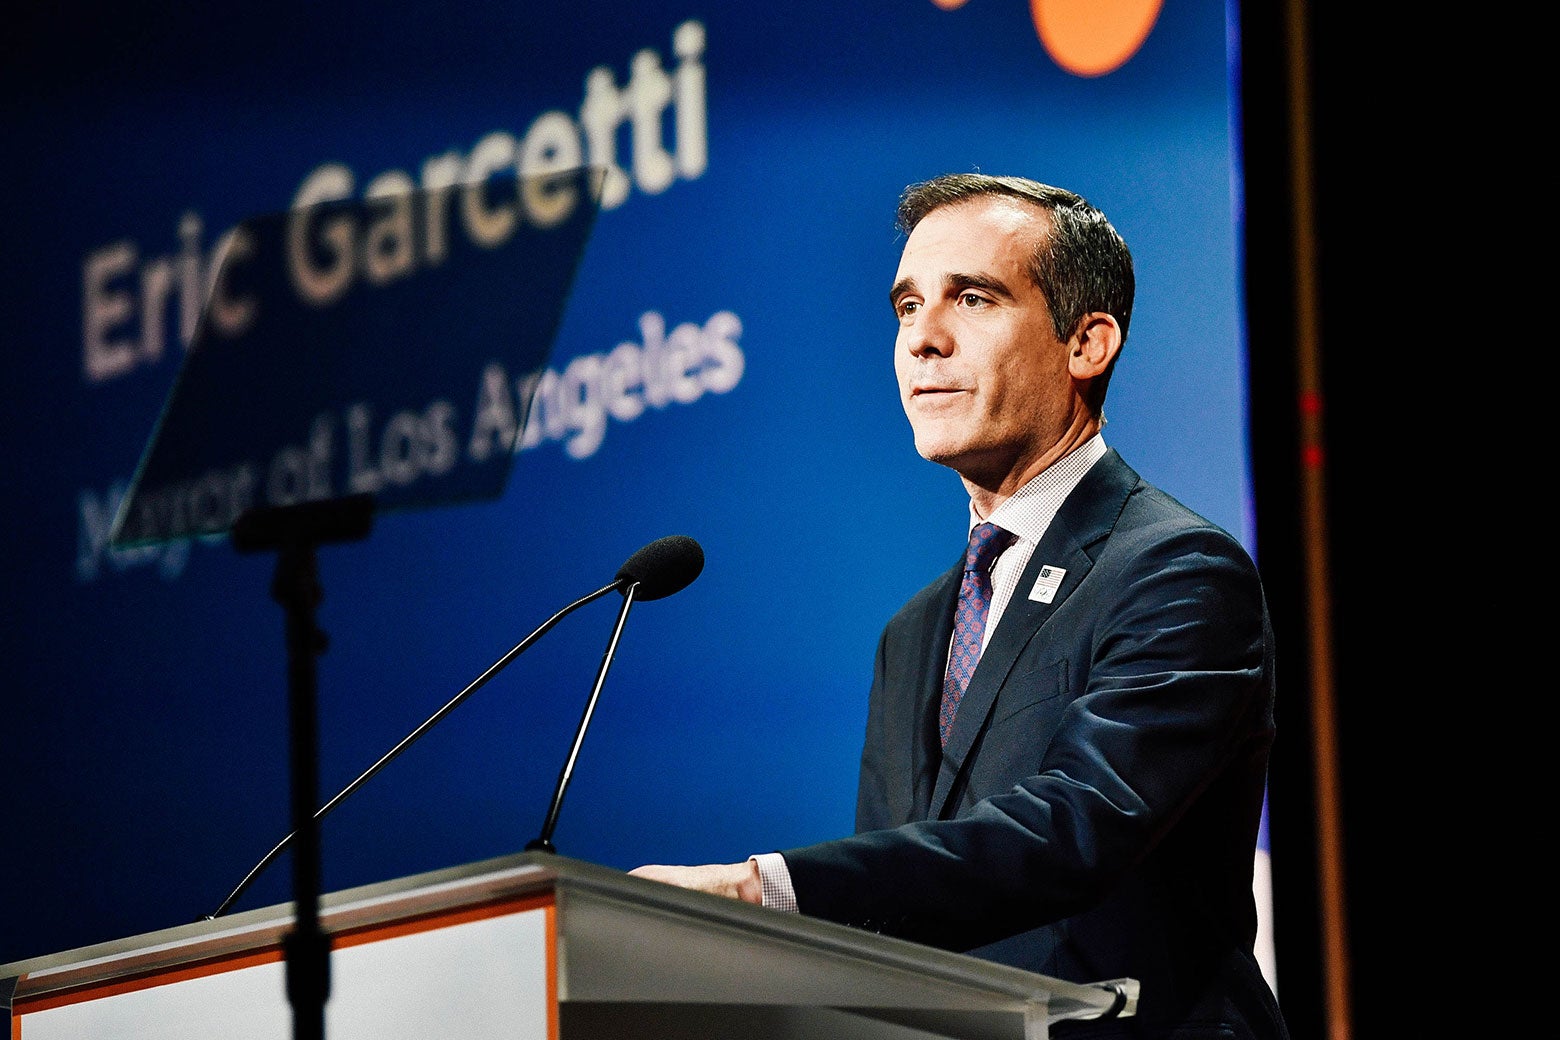 Los Angeles Mayor Eric Garcetti speaks onstage during the Alliance for Children's Rights 26th Annual Dinner on March 28 in Beverly Hills, California.